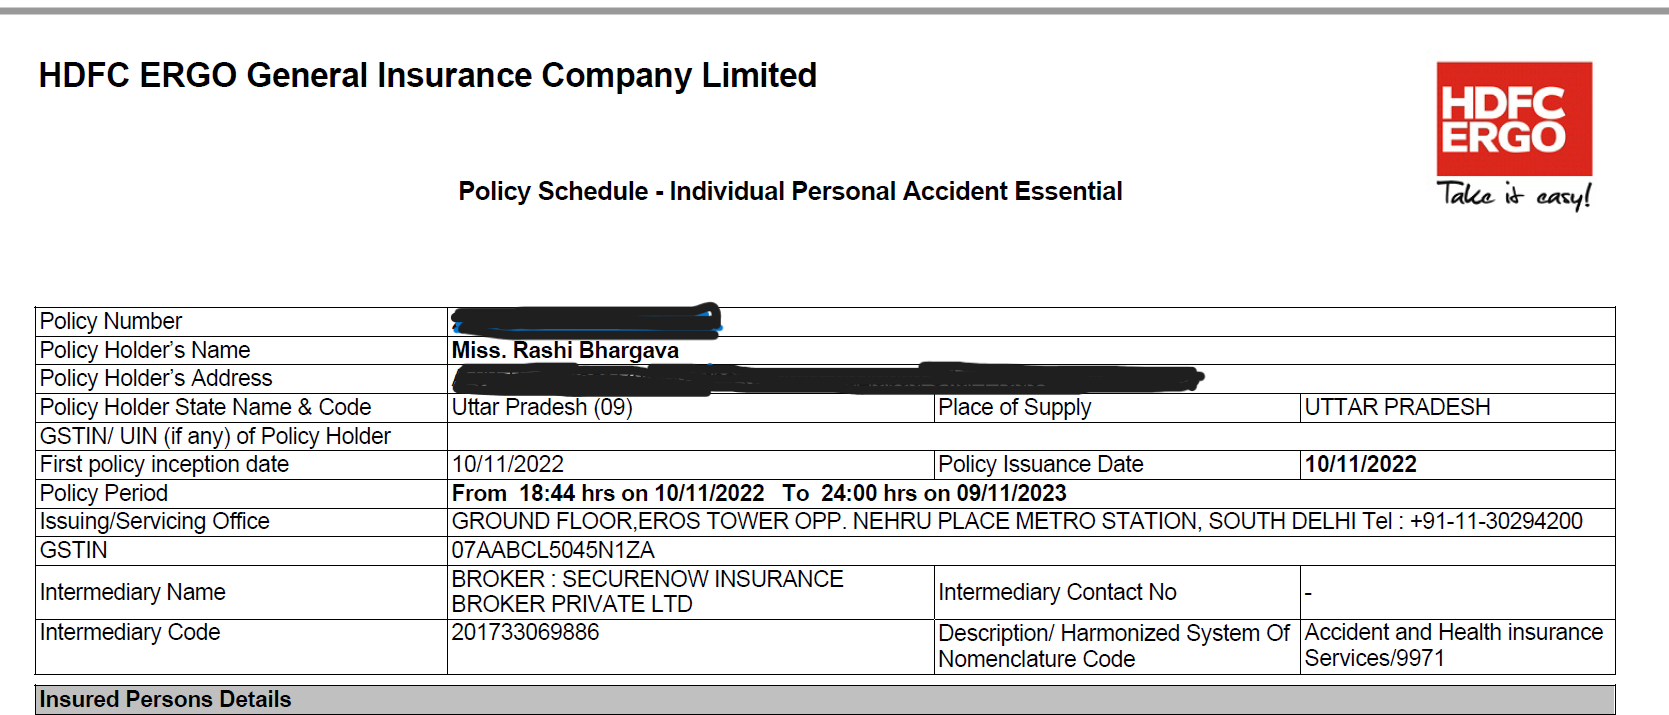 Why I bought Personal accident insurance policy